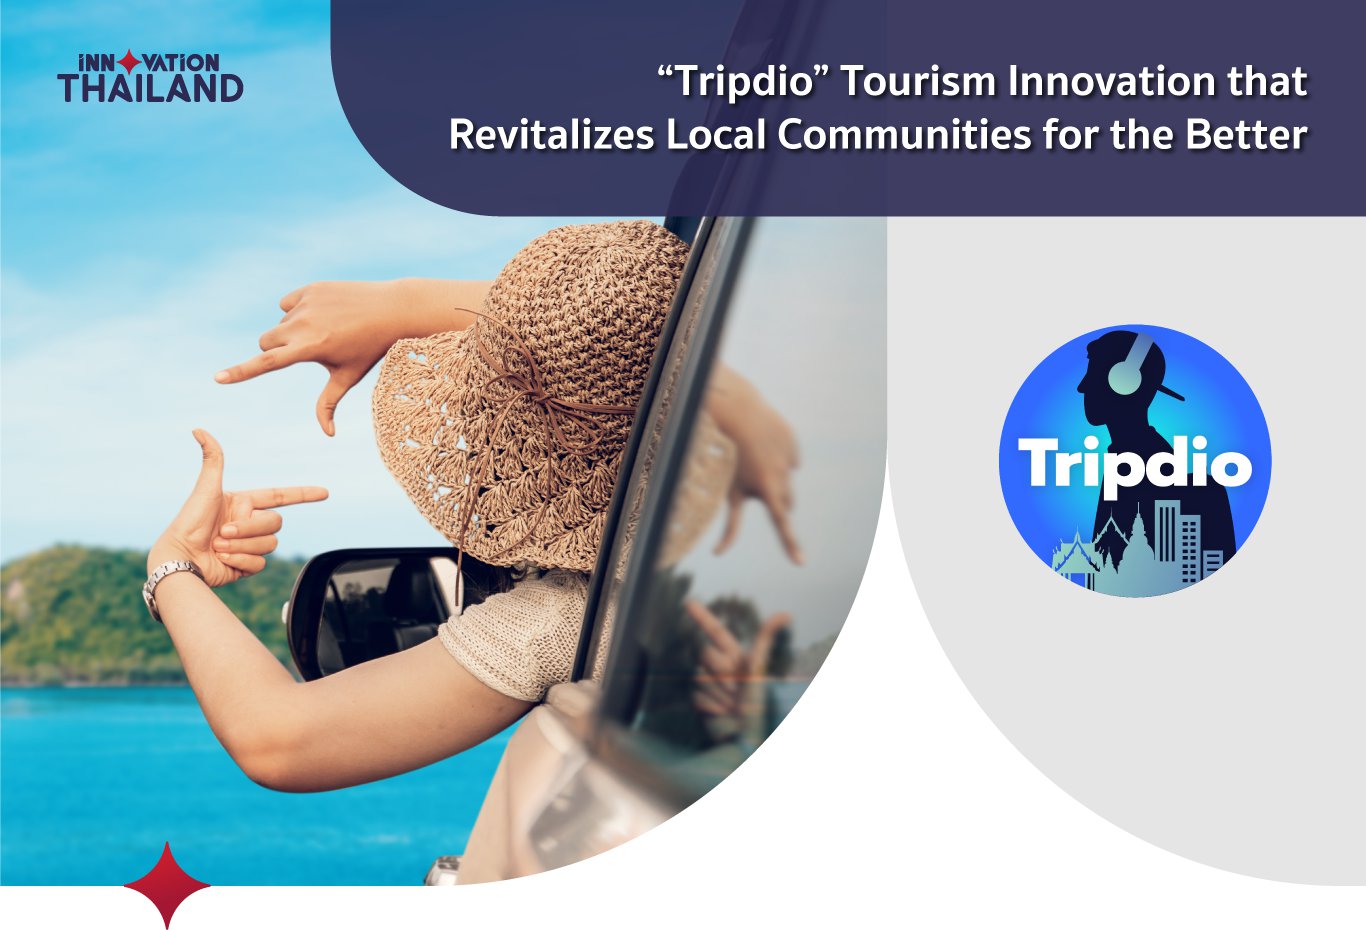 Tripdio Tourism Innovation that Revitalizes Local Communities for the Better